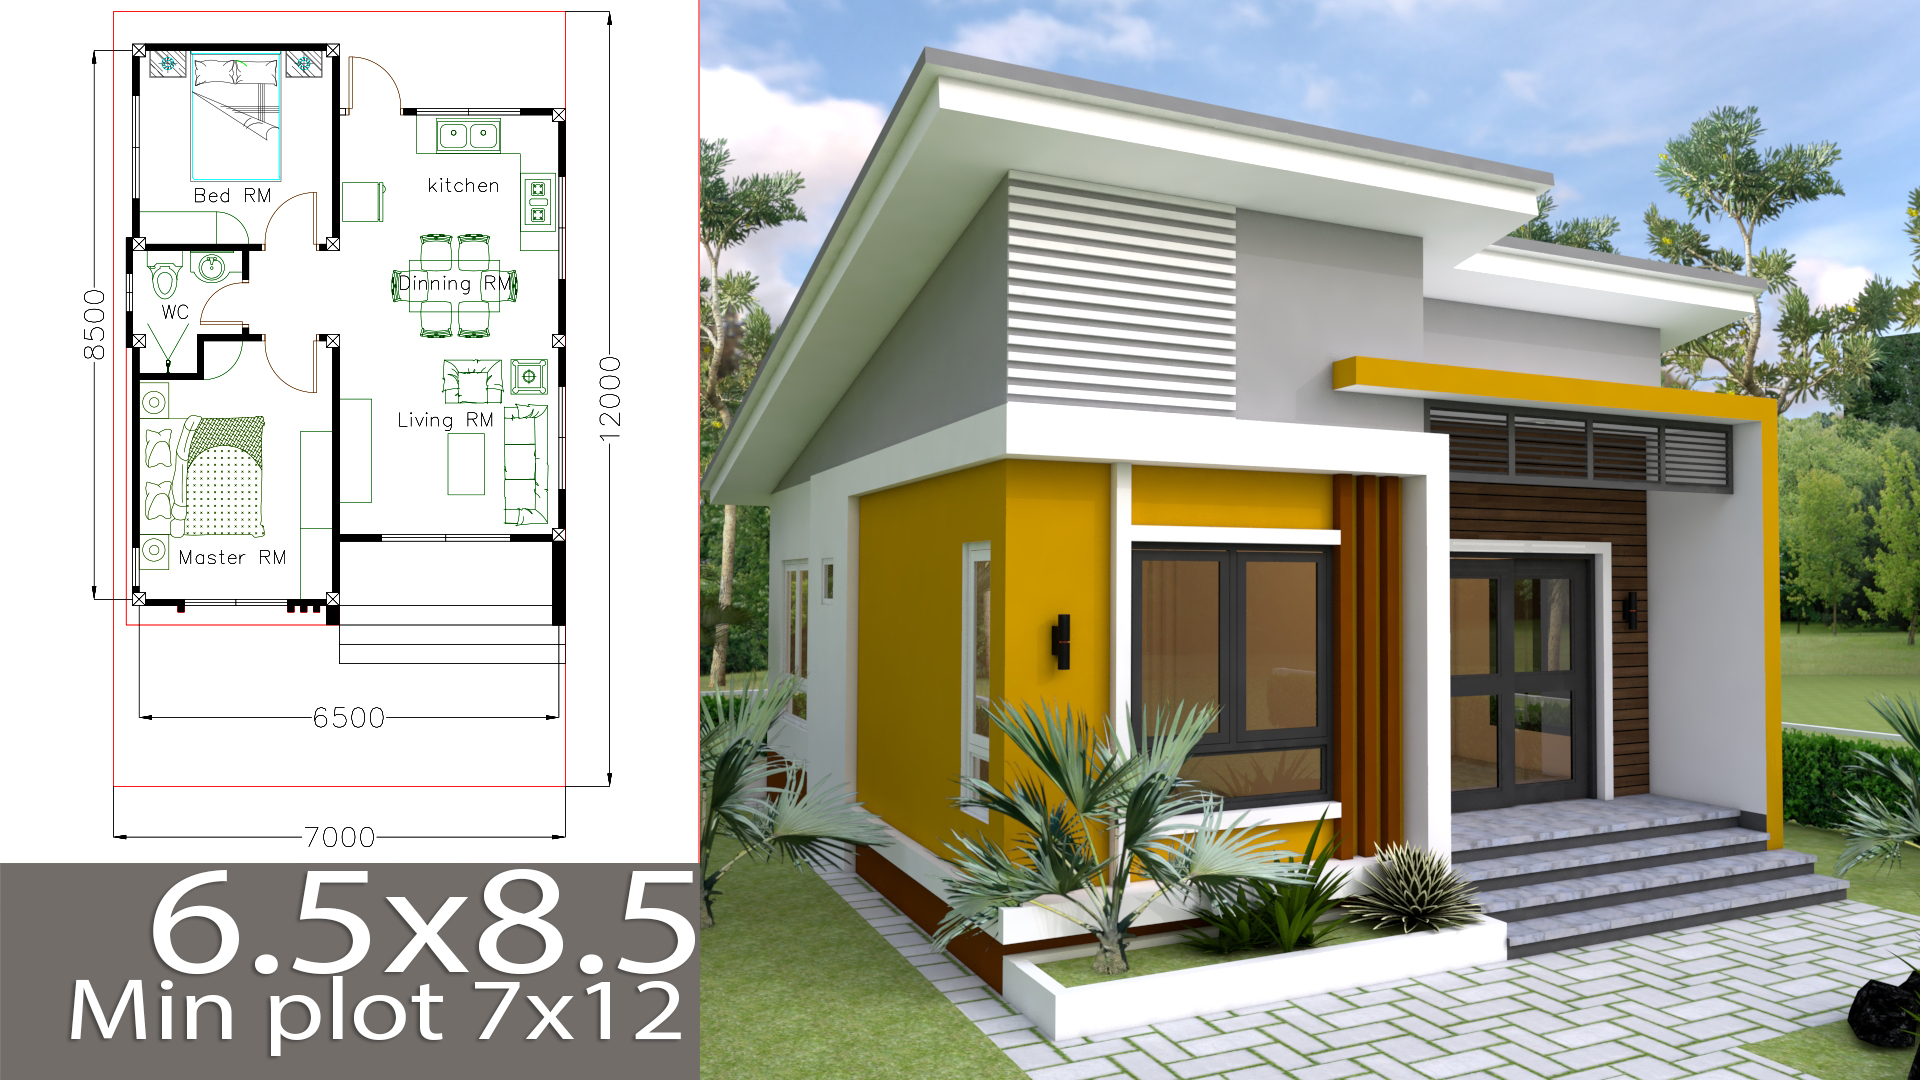  Small  Home  design  Plan  6 5x8 5m with 2 Bedrooms  SamPhoas 